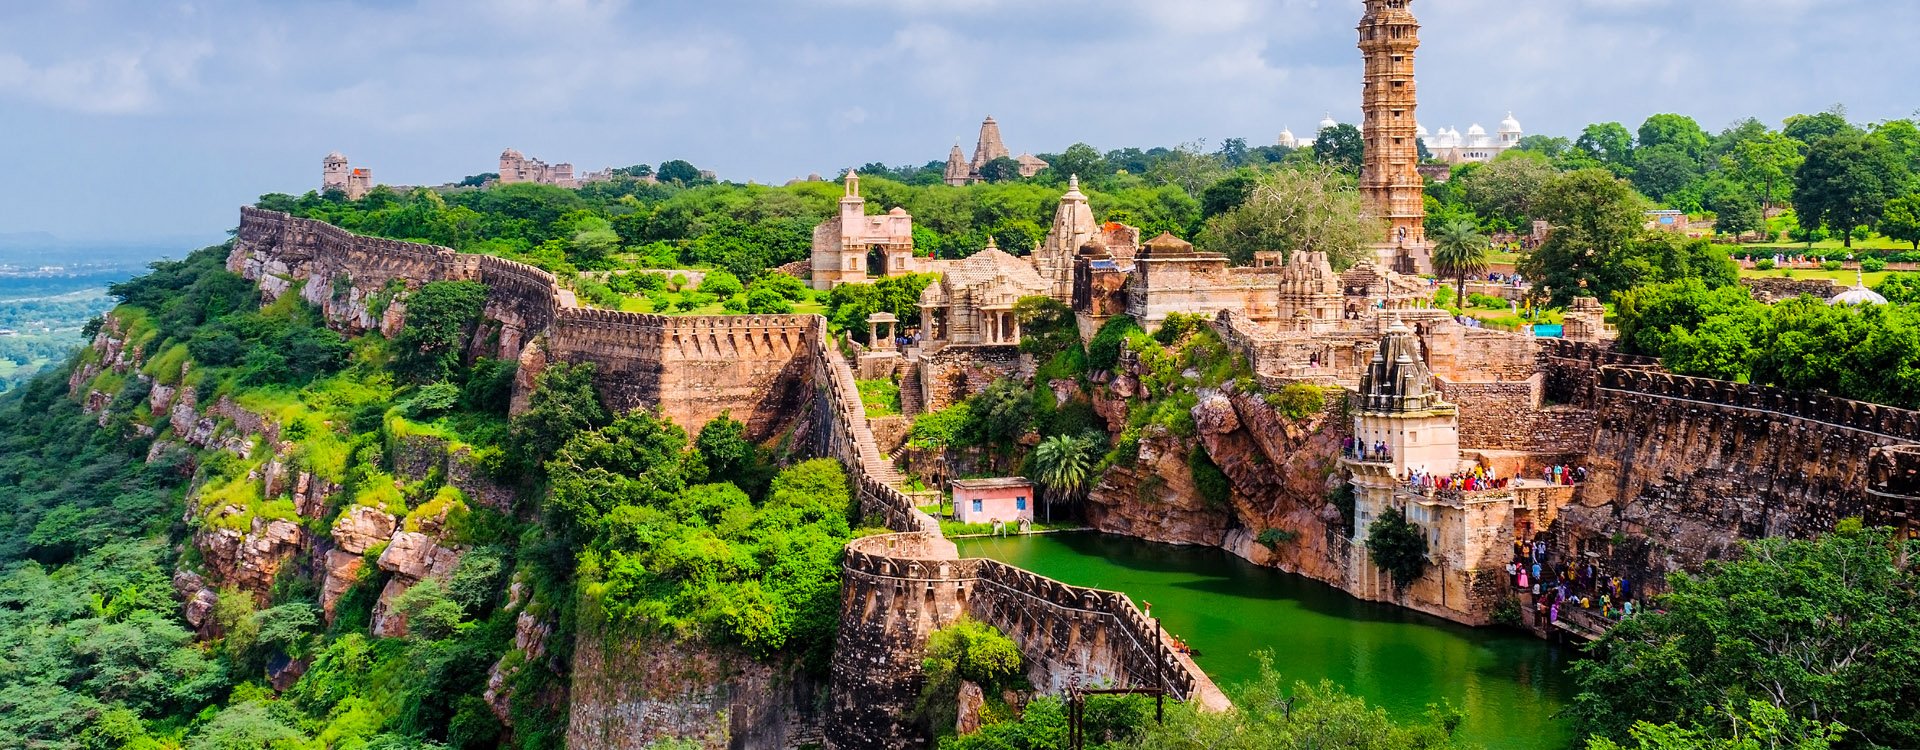 A landscape view of Chittorgarh fort, a UNESCO world heritage site, Rajasthan, India